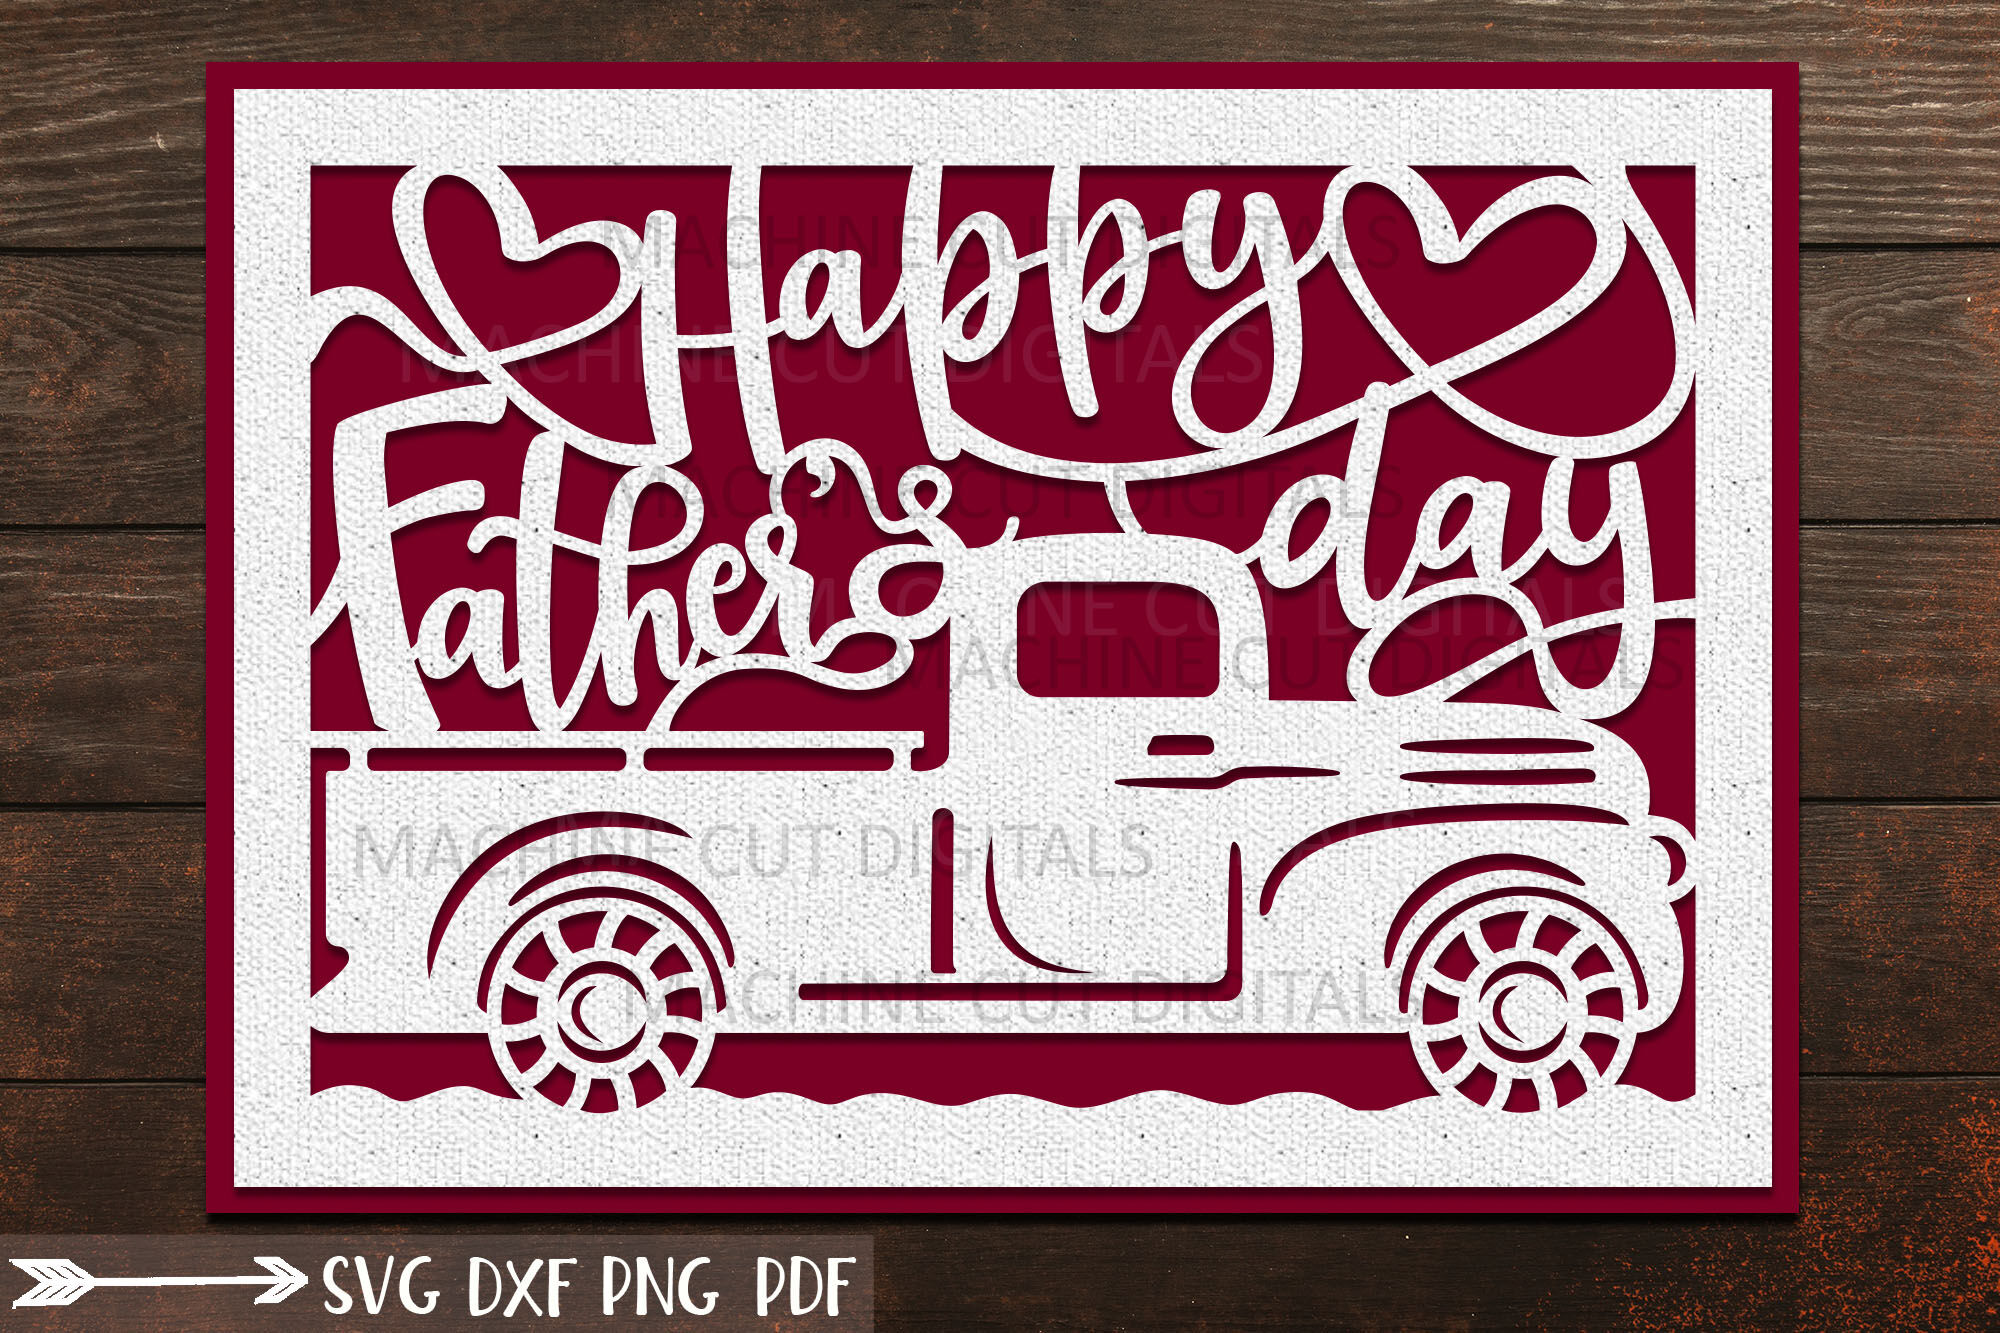 Happy Fathers Day Card Svg Dxf Laser Cricut Cut Out Template By Kartcreation Thehungryjpeg Com